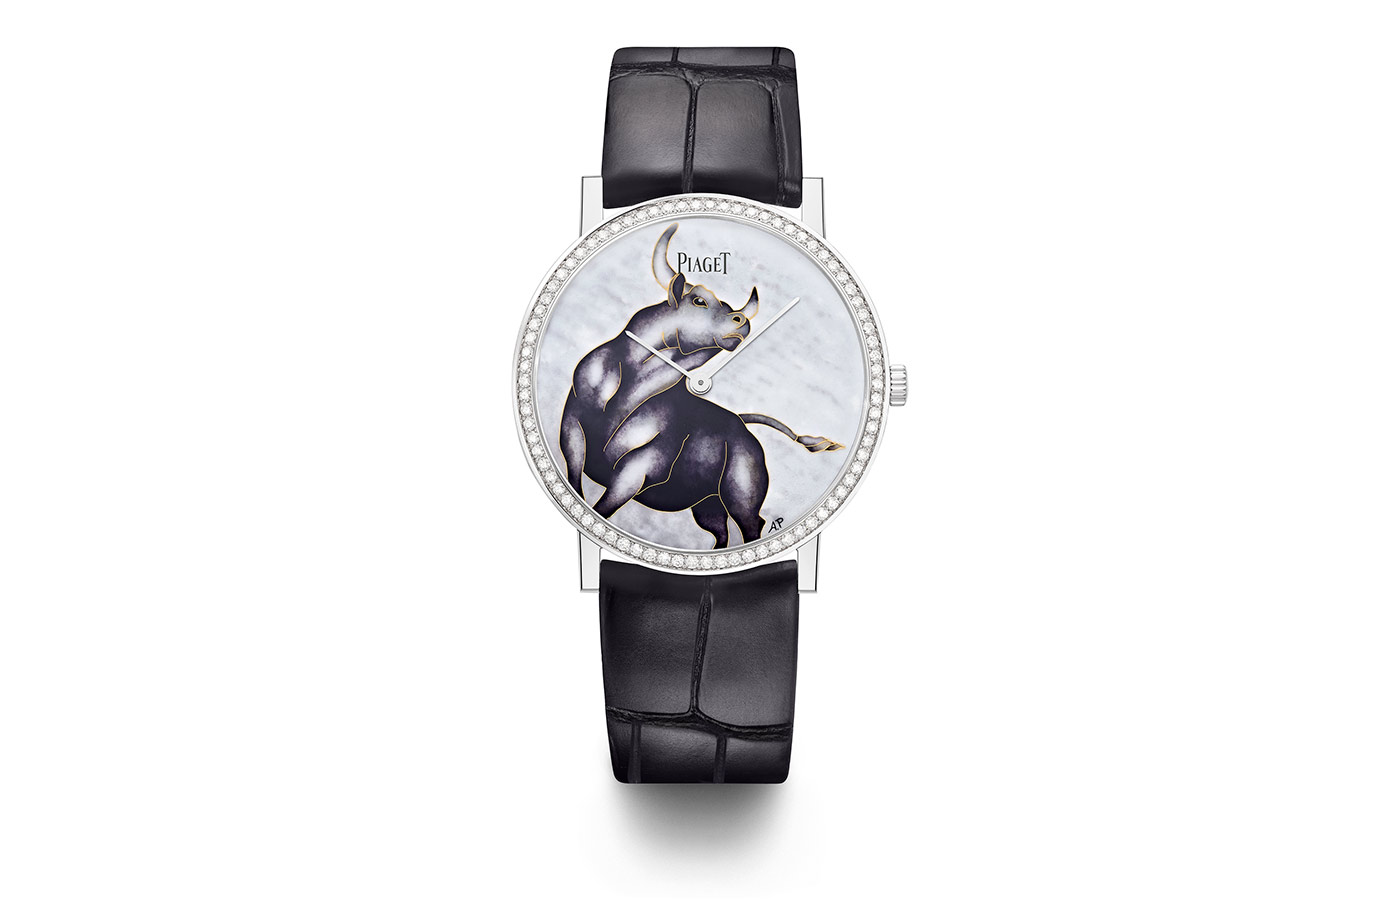 Piaget Altiplano Year of the Ox watch with grand feu cloisonné enamel applied by master enameller, Anita Porchet